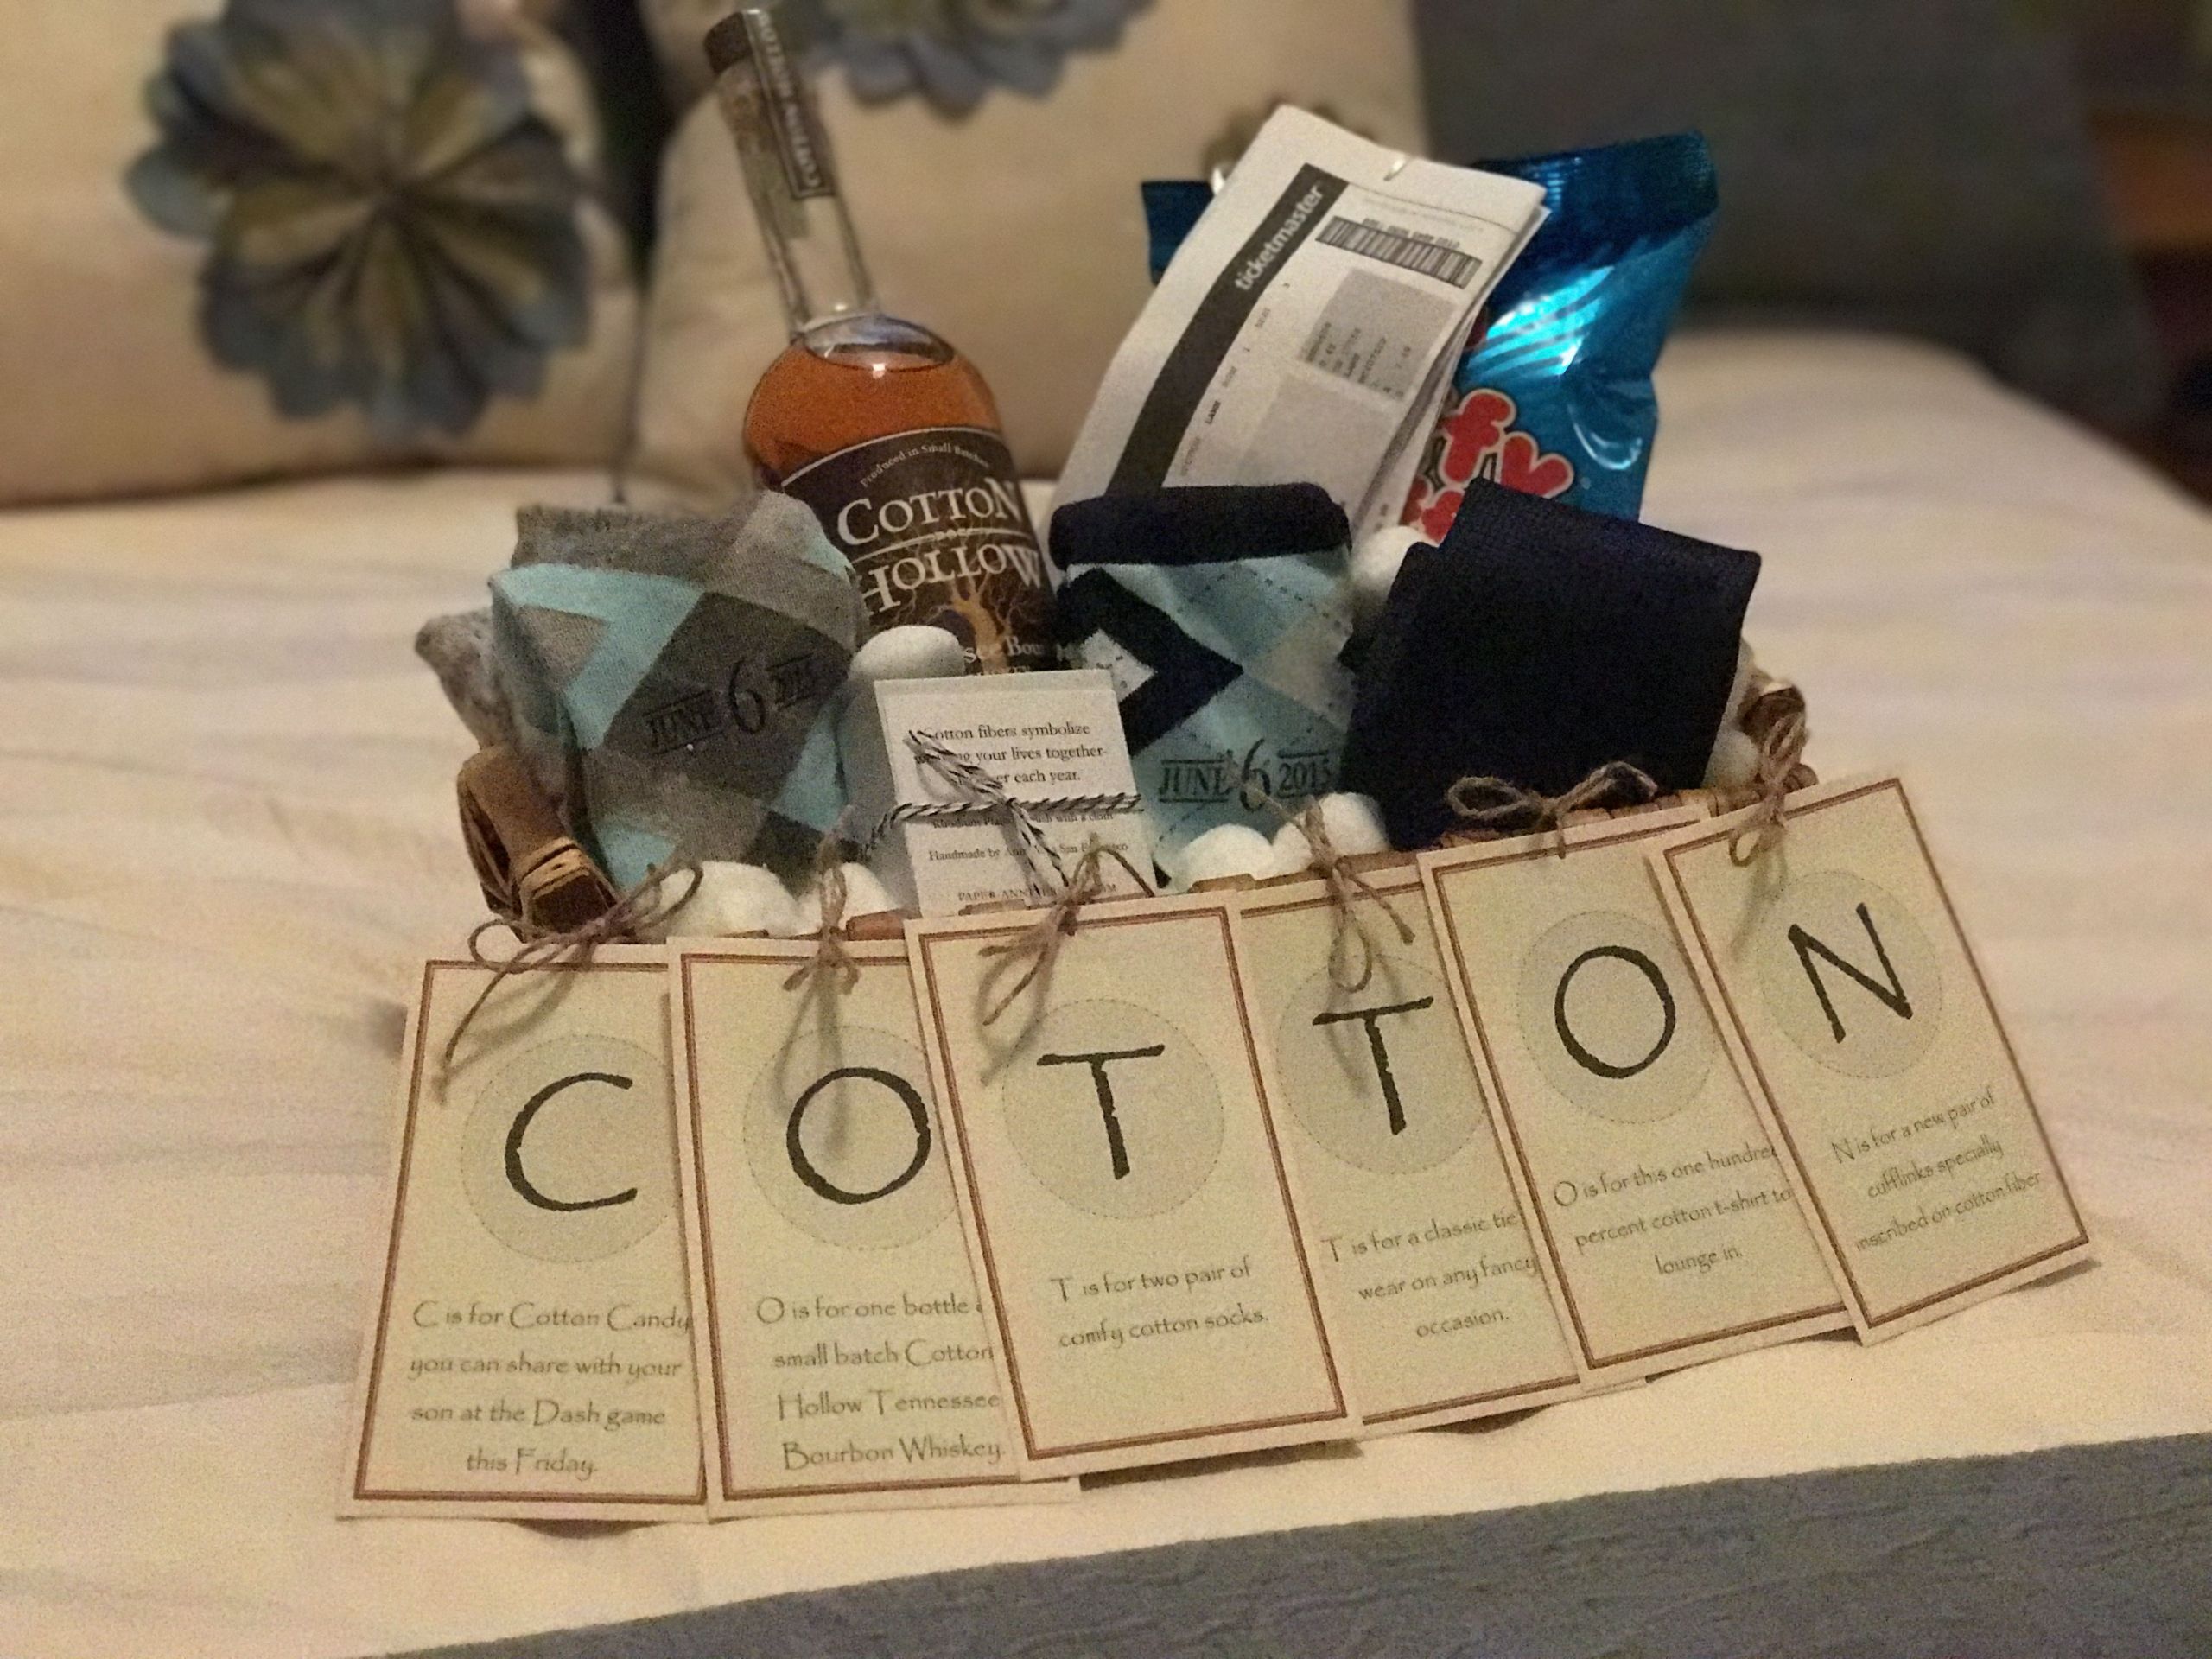 Second Anniversary Gift Ideas For Him
 The "Cotton" Anniversary Gift for Him